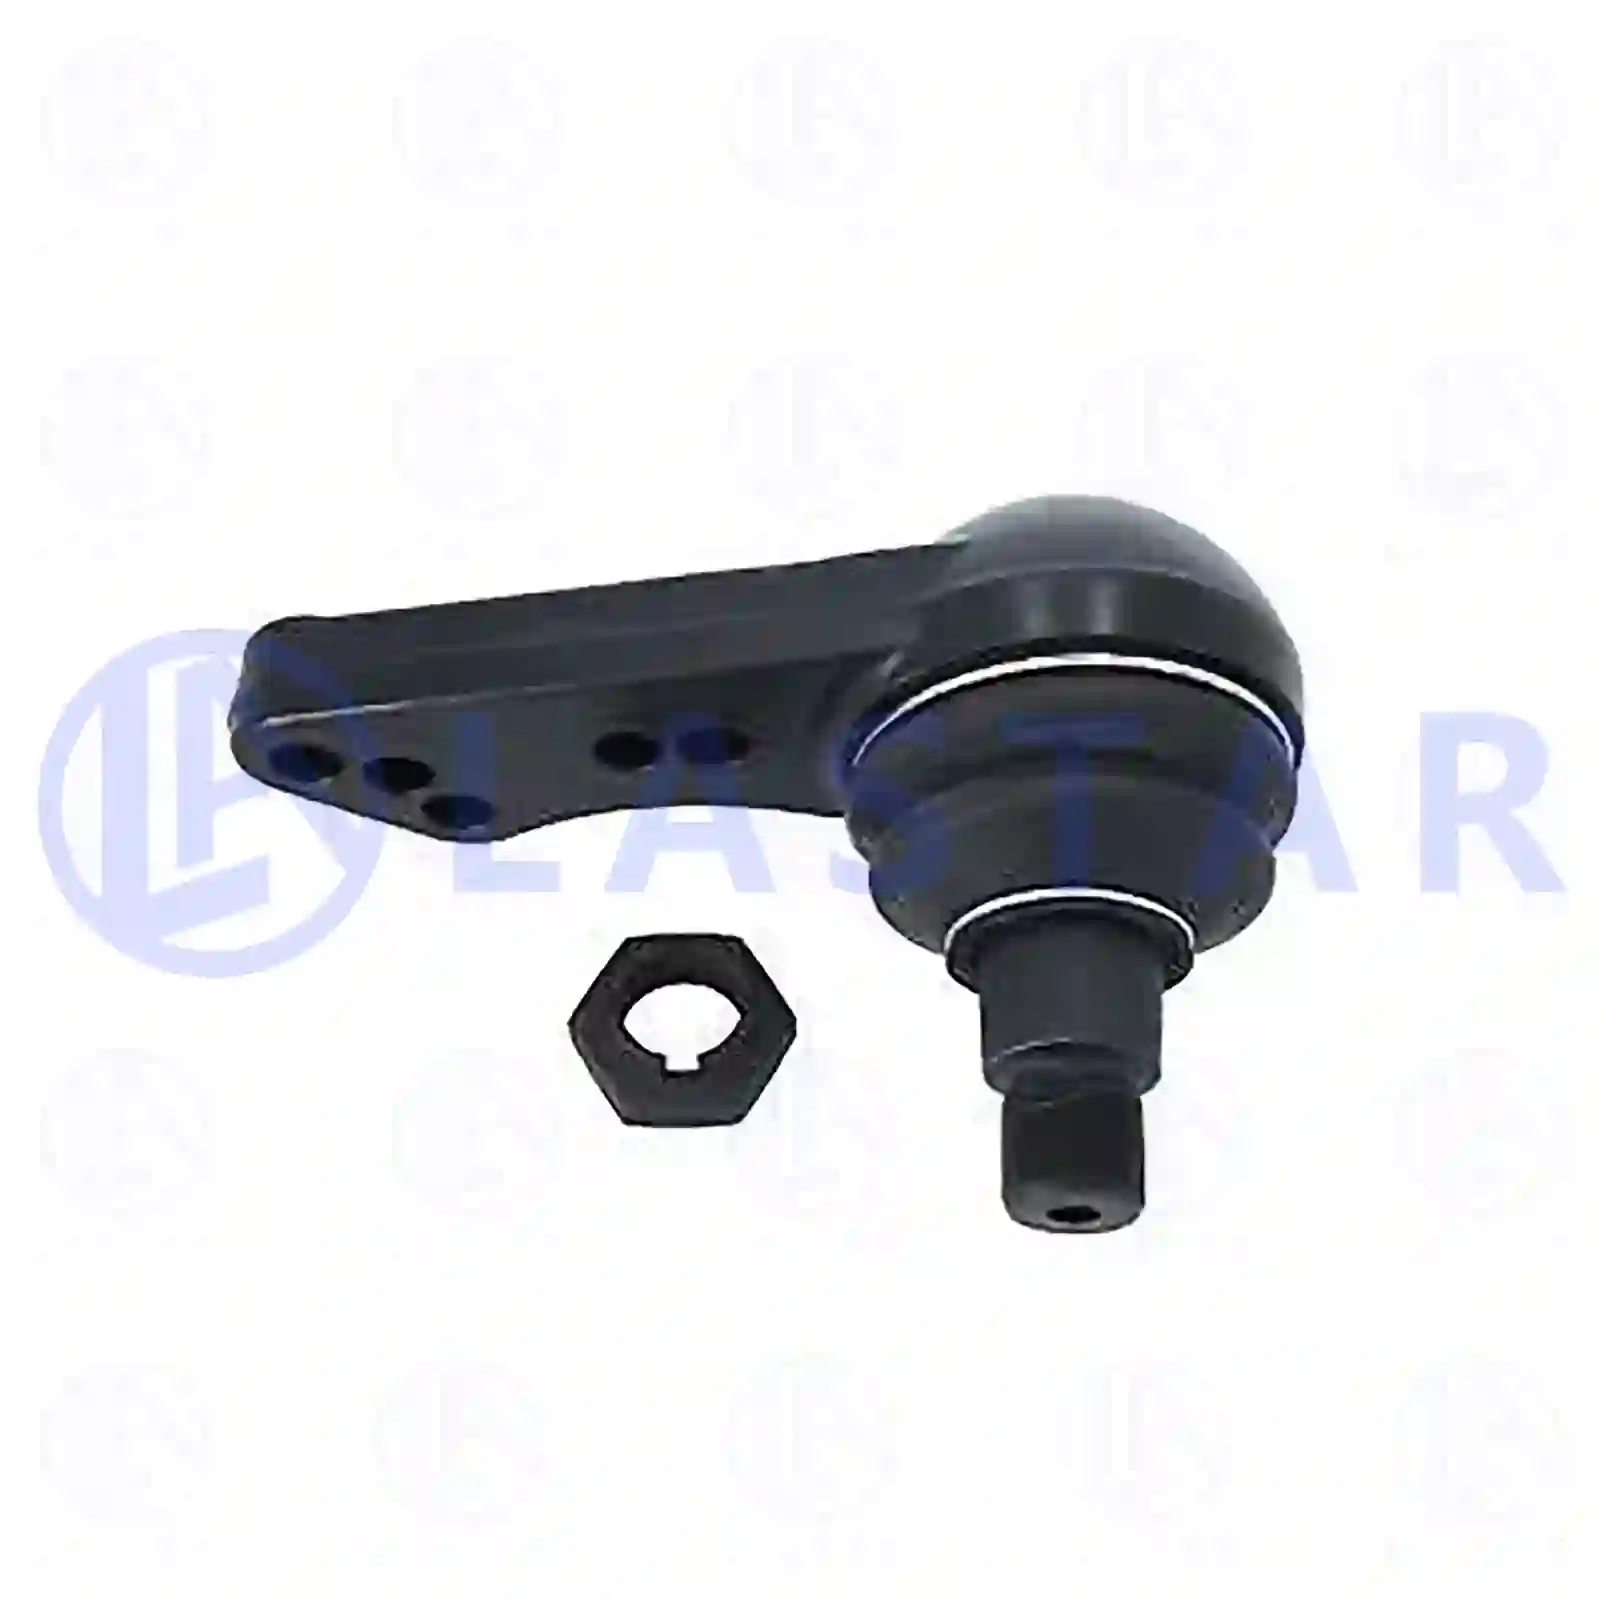 Ball joint, left, 77730362, 5801890993 ||  77730362 Lastar Spare Part | Truck Spare Parts, Auotomotive Spare Parts Ball joint, left, 77730362, 5801890993 ||  77730362 Lastar Spare Part | Truck Spare Parts, Auotomotive Spare Parts